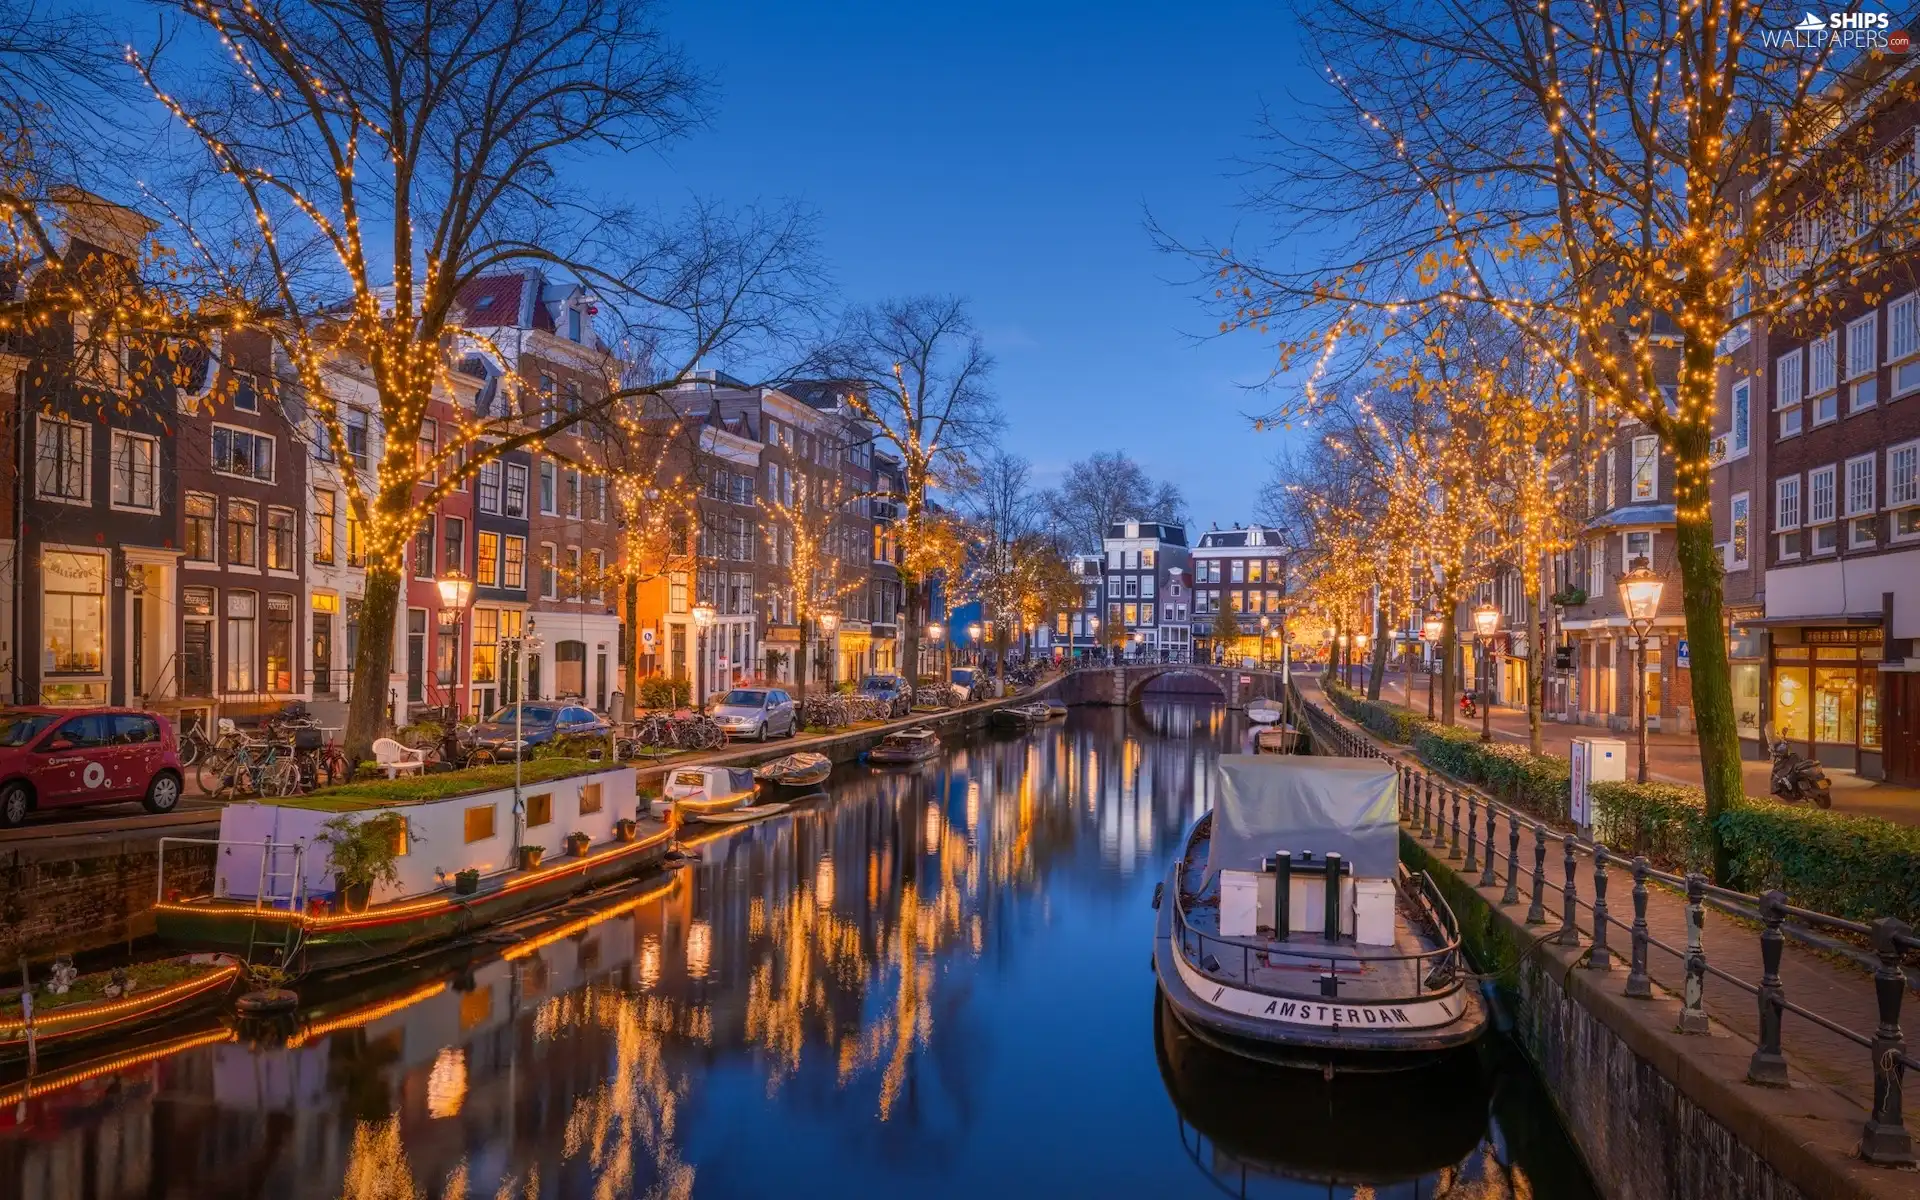 canal, boats, Netherlands, Lamp, Amsterdam, Houses, Street, lighting